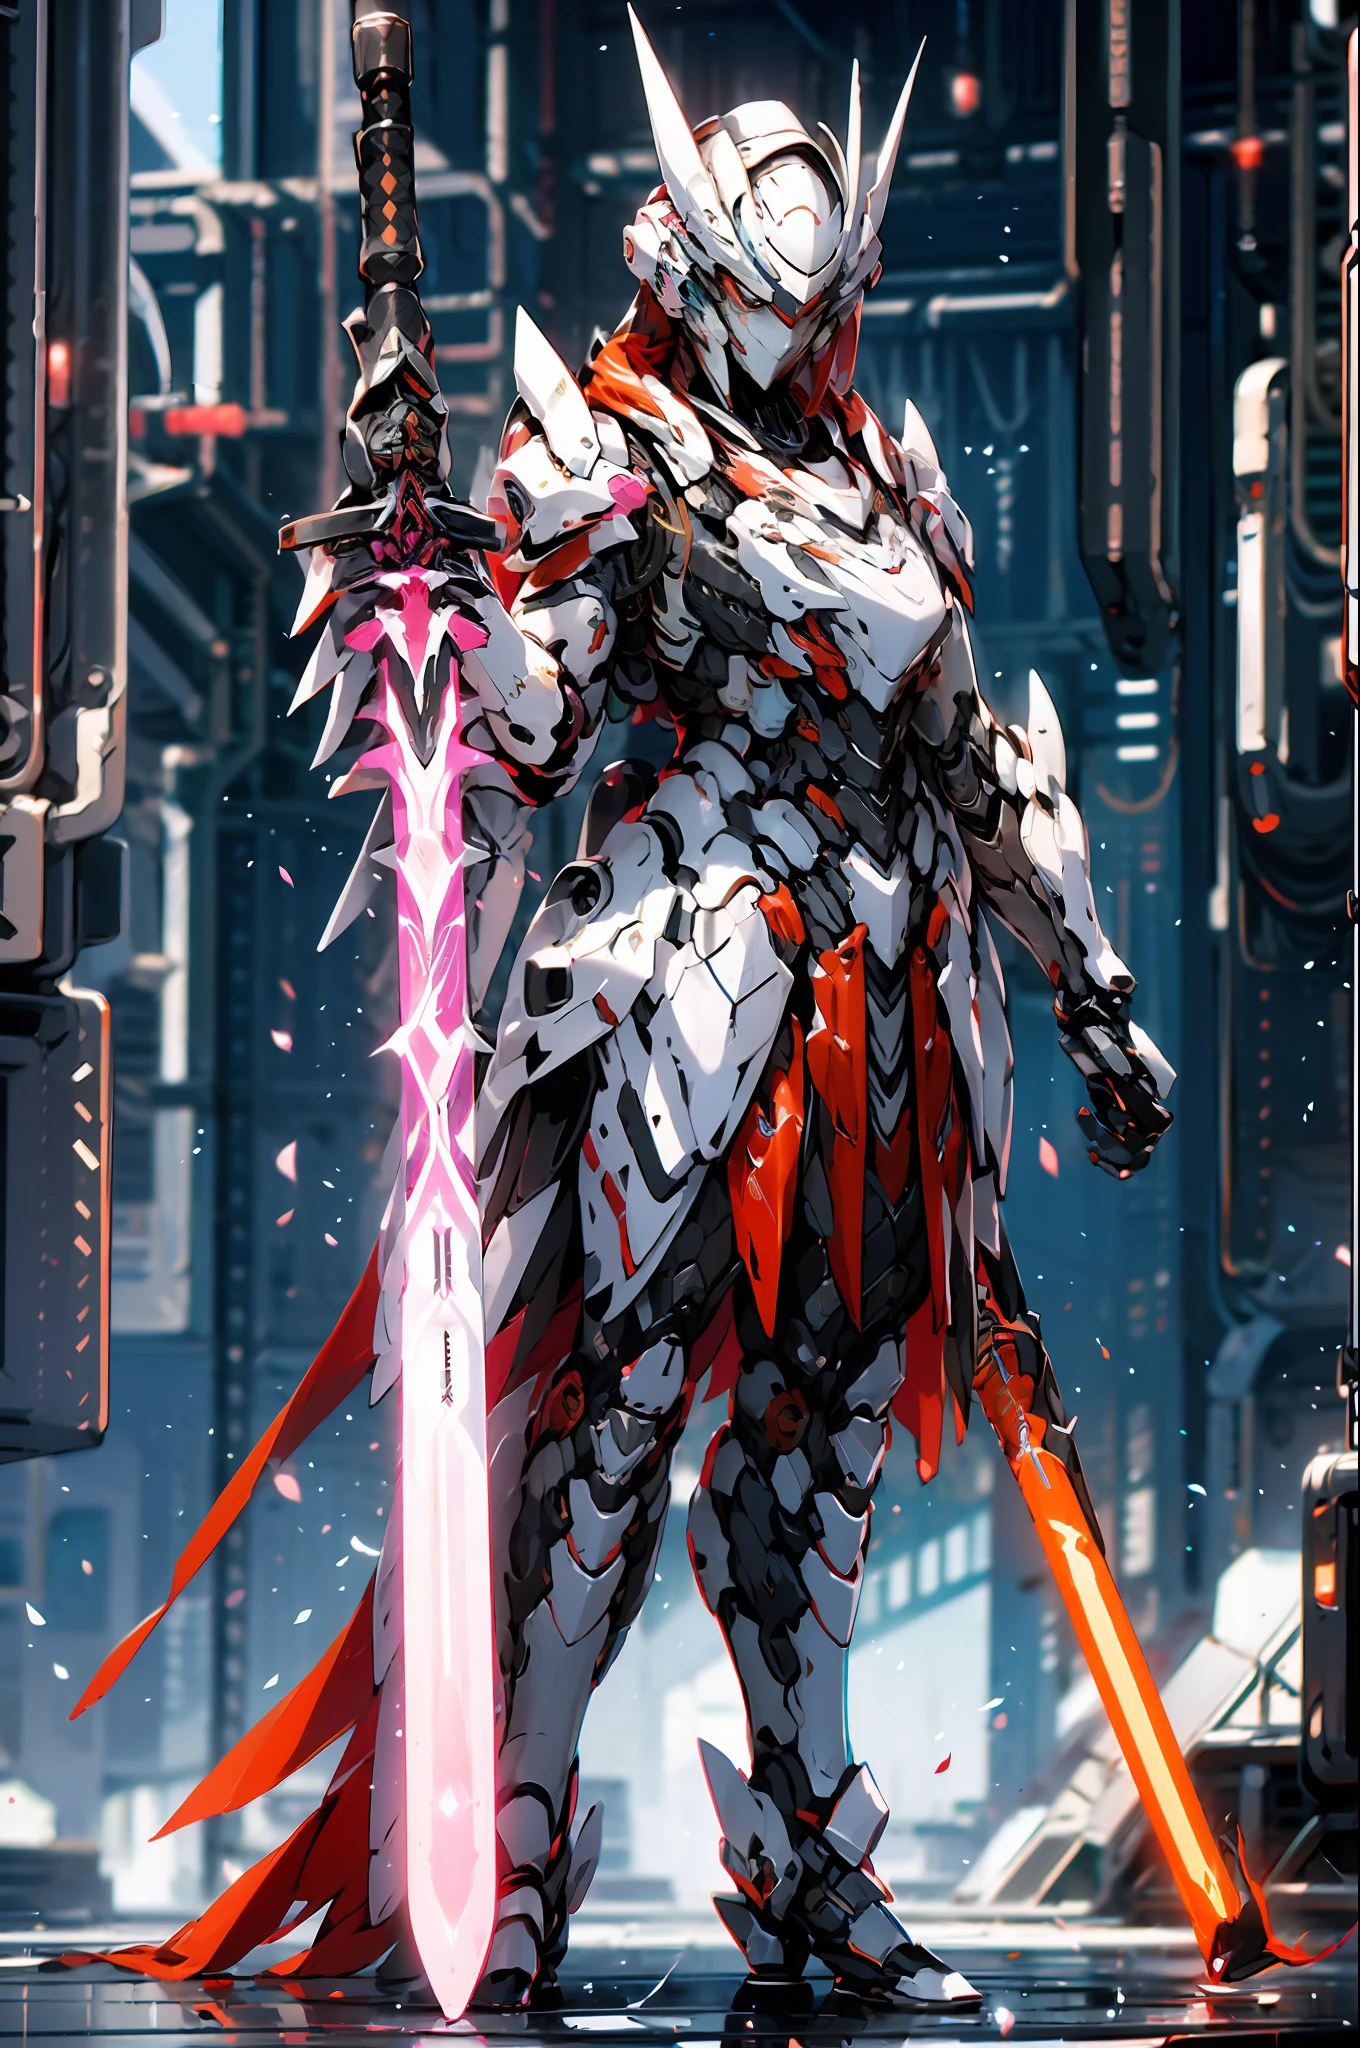 mecha_musume, 1 girl, long_hair, science_fiction, weapon, lightsaber, holding_sword, blue_eyes, solo, headdress, holding_weapon, mecha, bust, pink and white livery, angel halo, sad gaze, upper body, mermaid line,